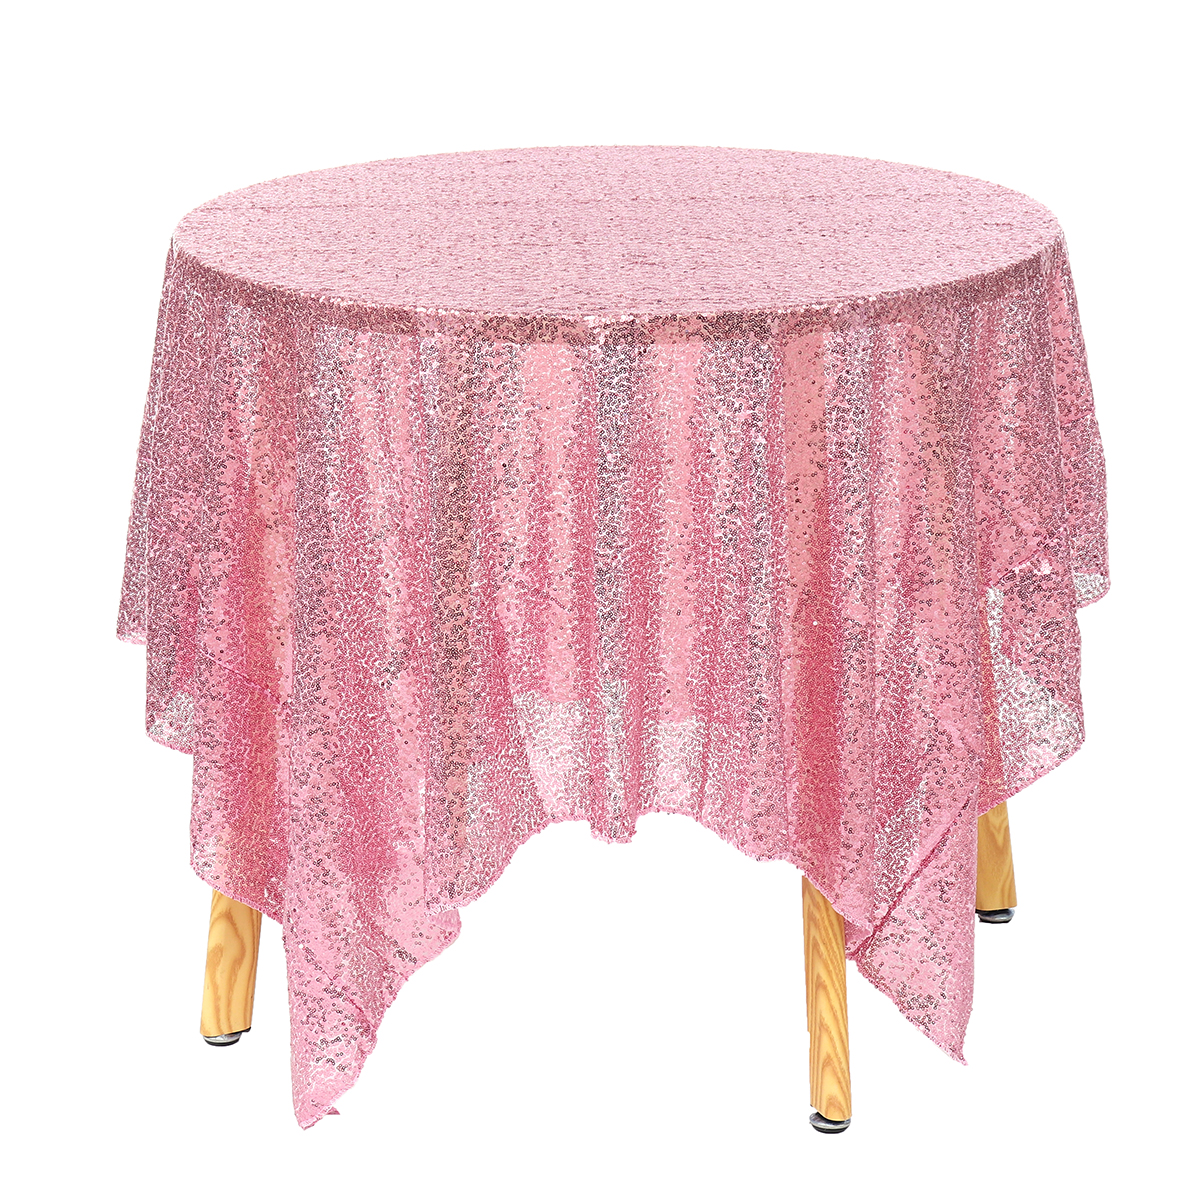 Sequin-Fabric-Wedding-Party-Table-Covers-Photography-Backdrop-Curtains-Table-Cloth-1636379-10